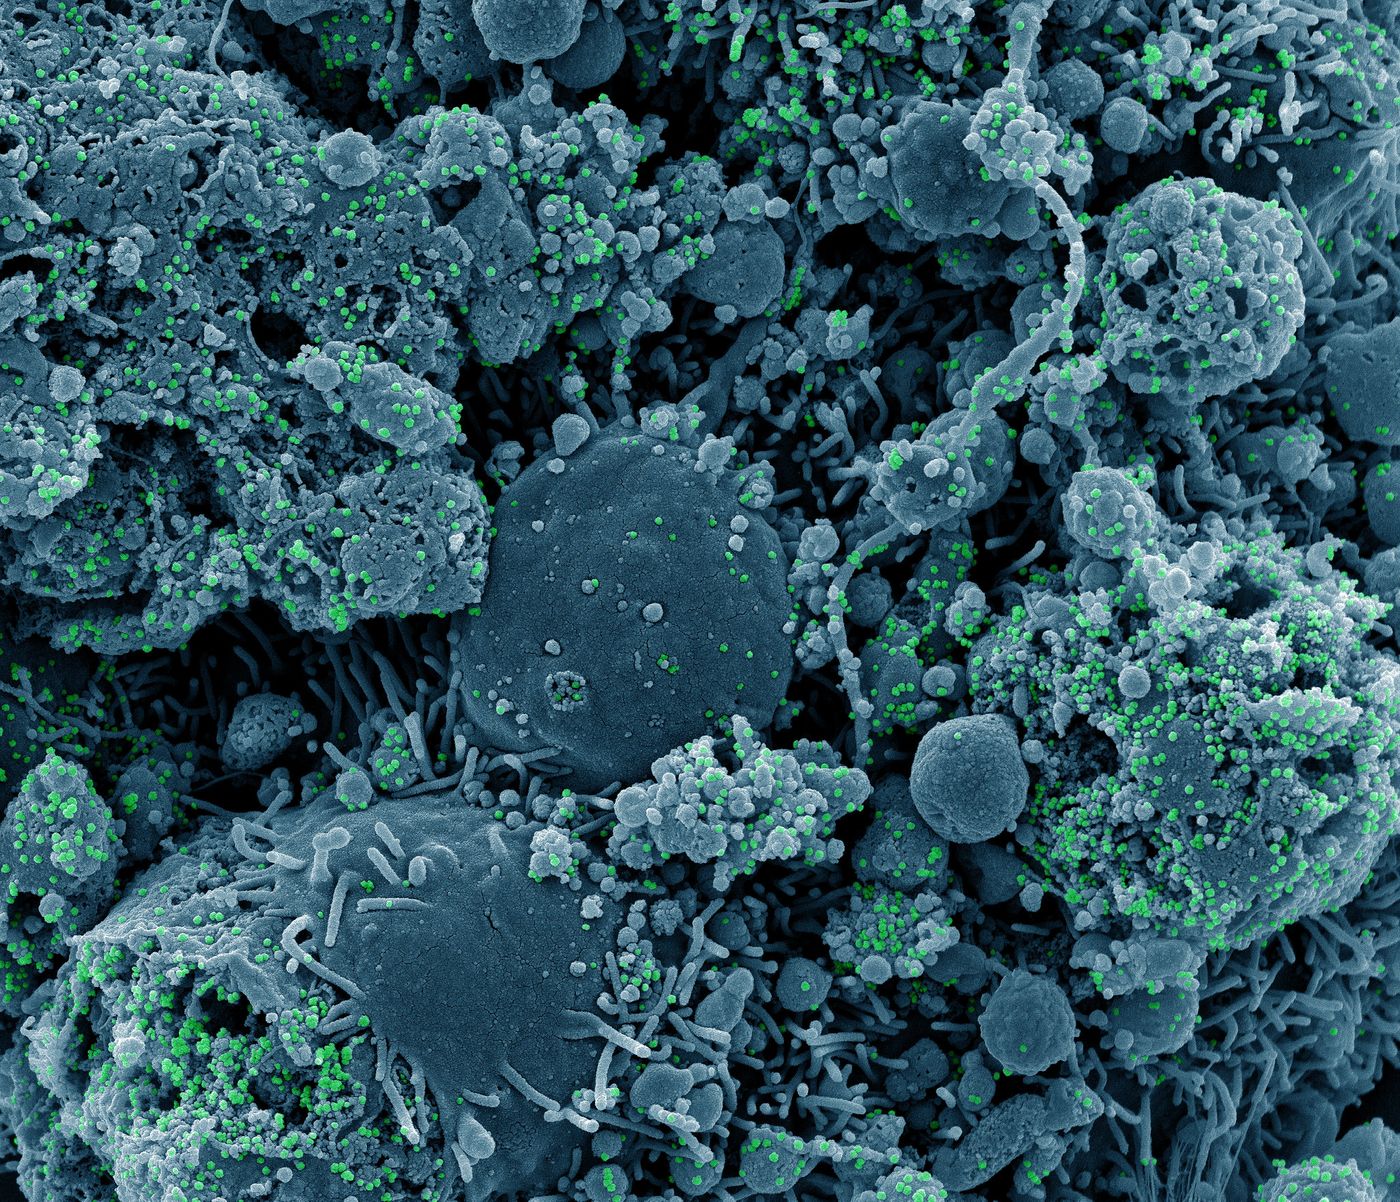 Colorized scanning electron micrograph of chronically infected and partially lysed cells (blue) infected with a variant strain of SARS-CoV-2 virus particles (green), isolated from a patient sample. Image captured at the NIAID Integrated Research Facility (IRF) in Fort Detrick, Maryland. / Credit: NIAID